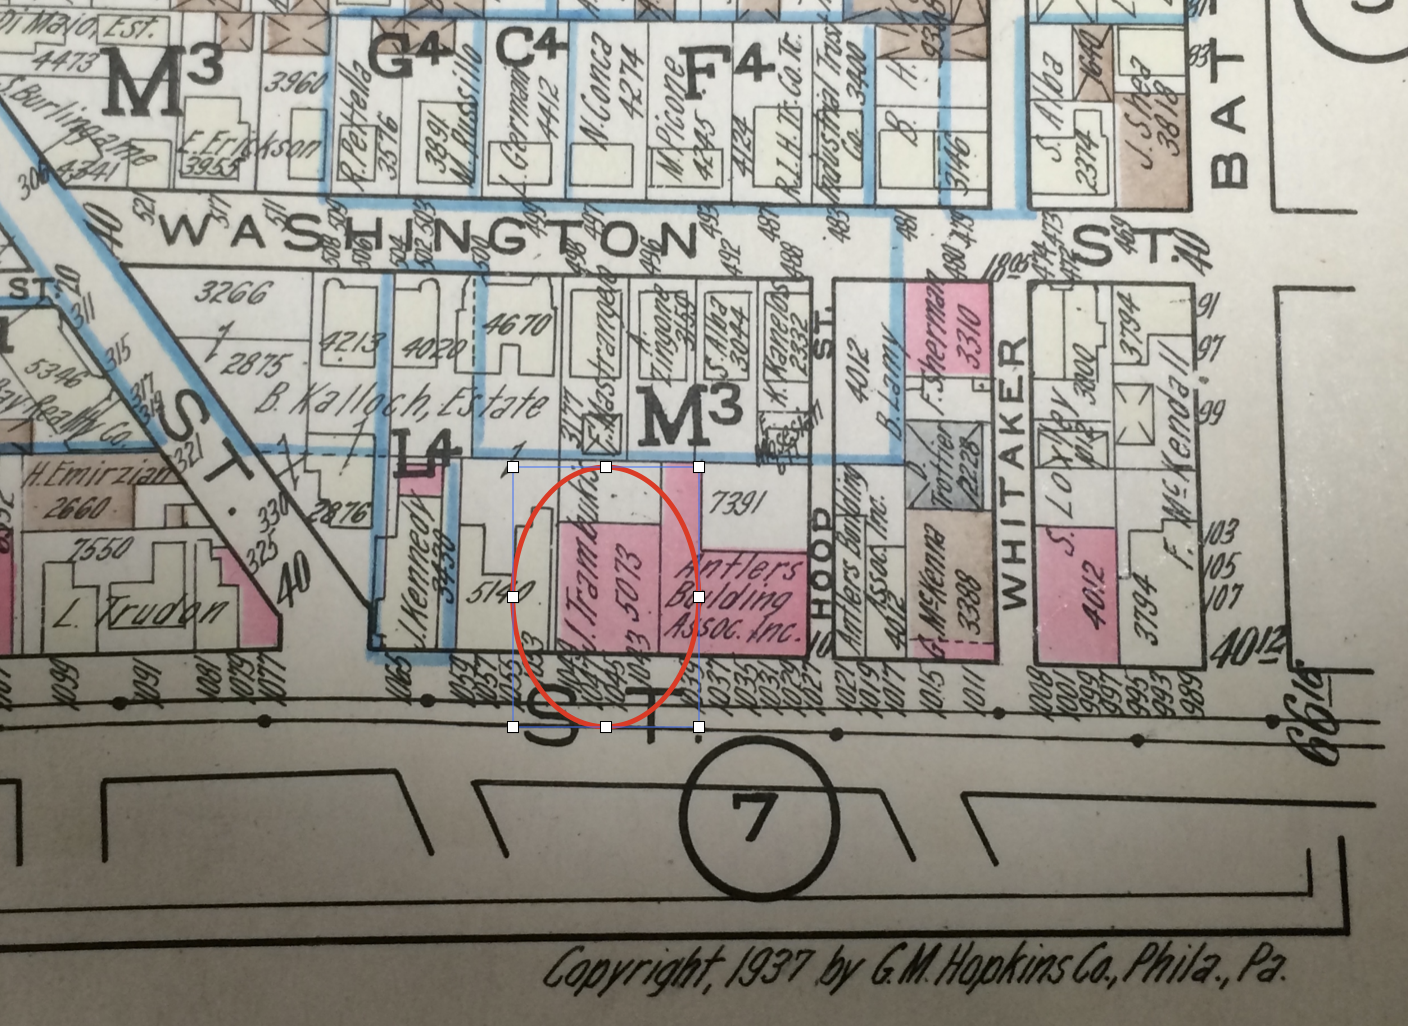 1049 Westminster St. as depicted on the 1937 Hopkins map.